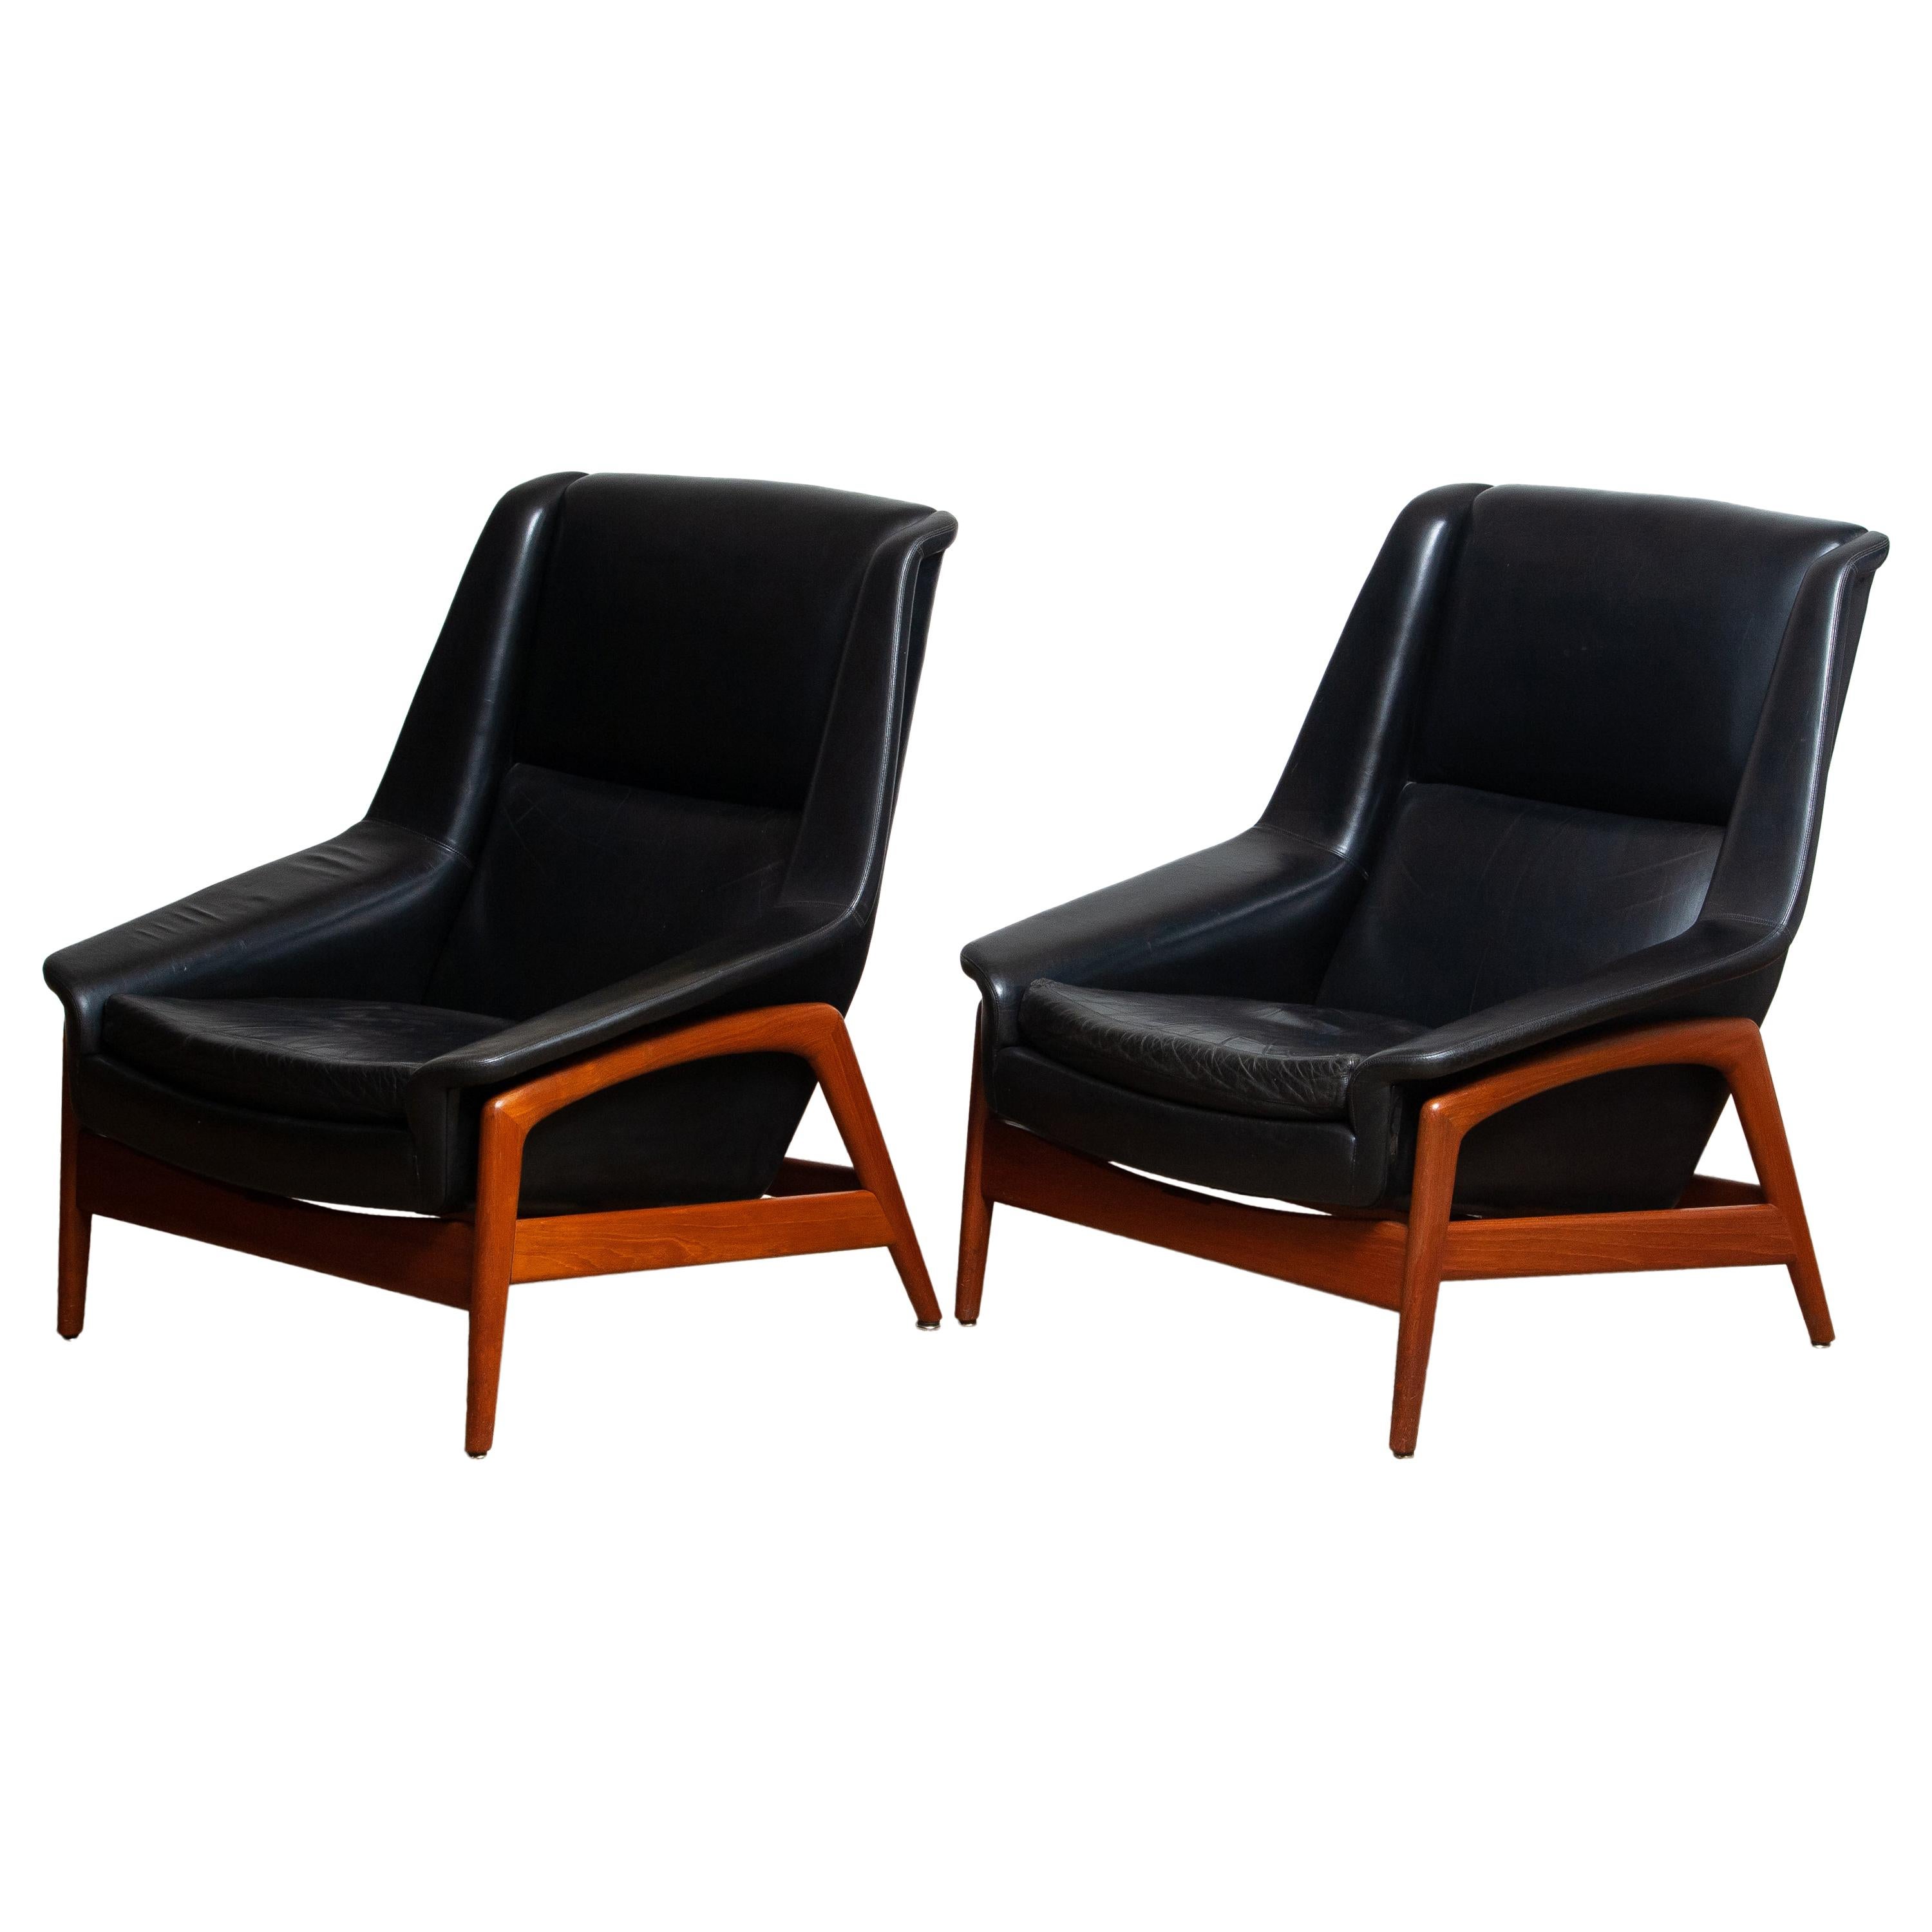 Stunning set of two easy or lounge chair in teak and upholstered with black leather by Folke Ohlsson for Dux, Sweden,
Model: Profil
Overall in good and both in original condition.